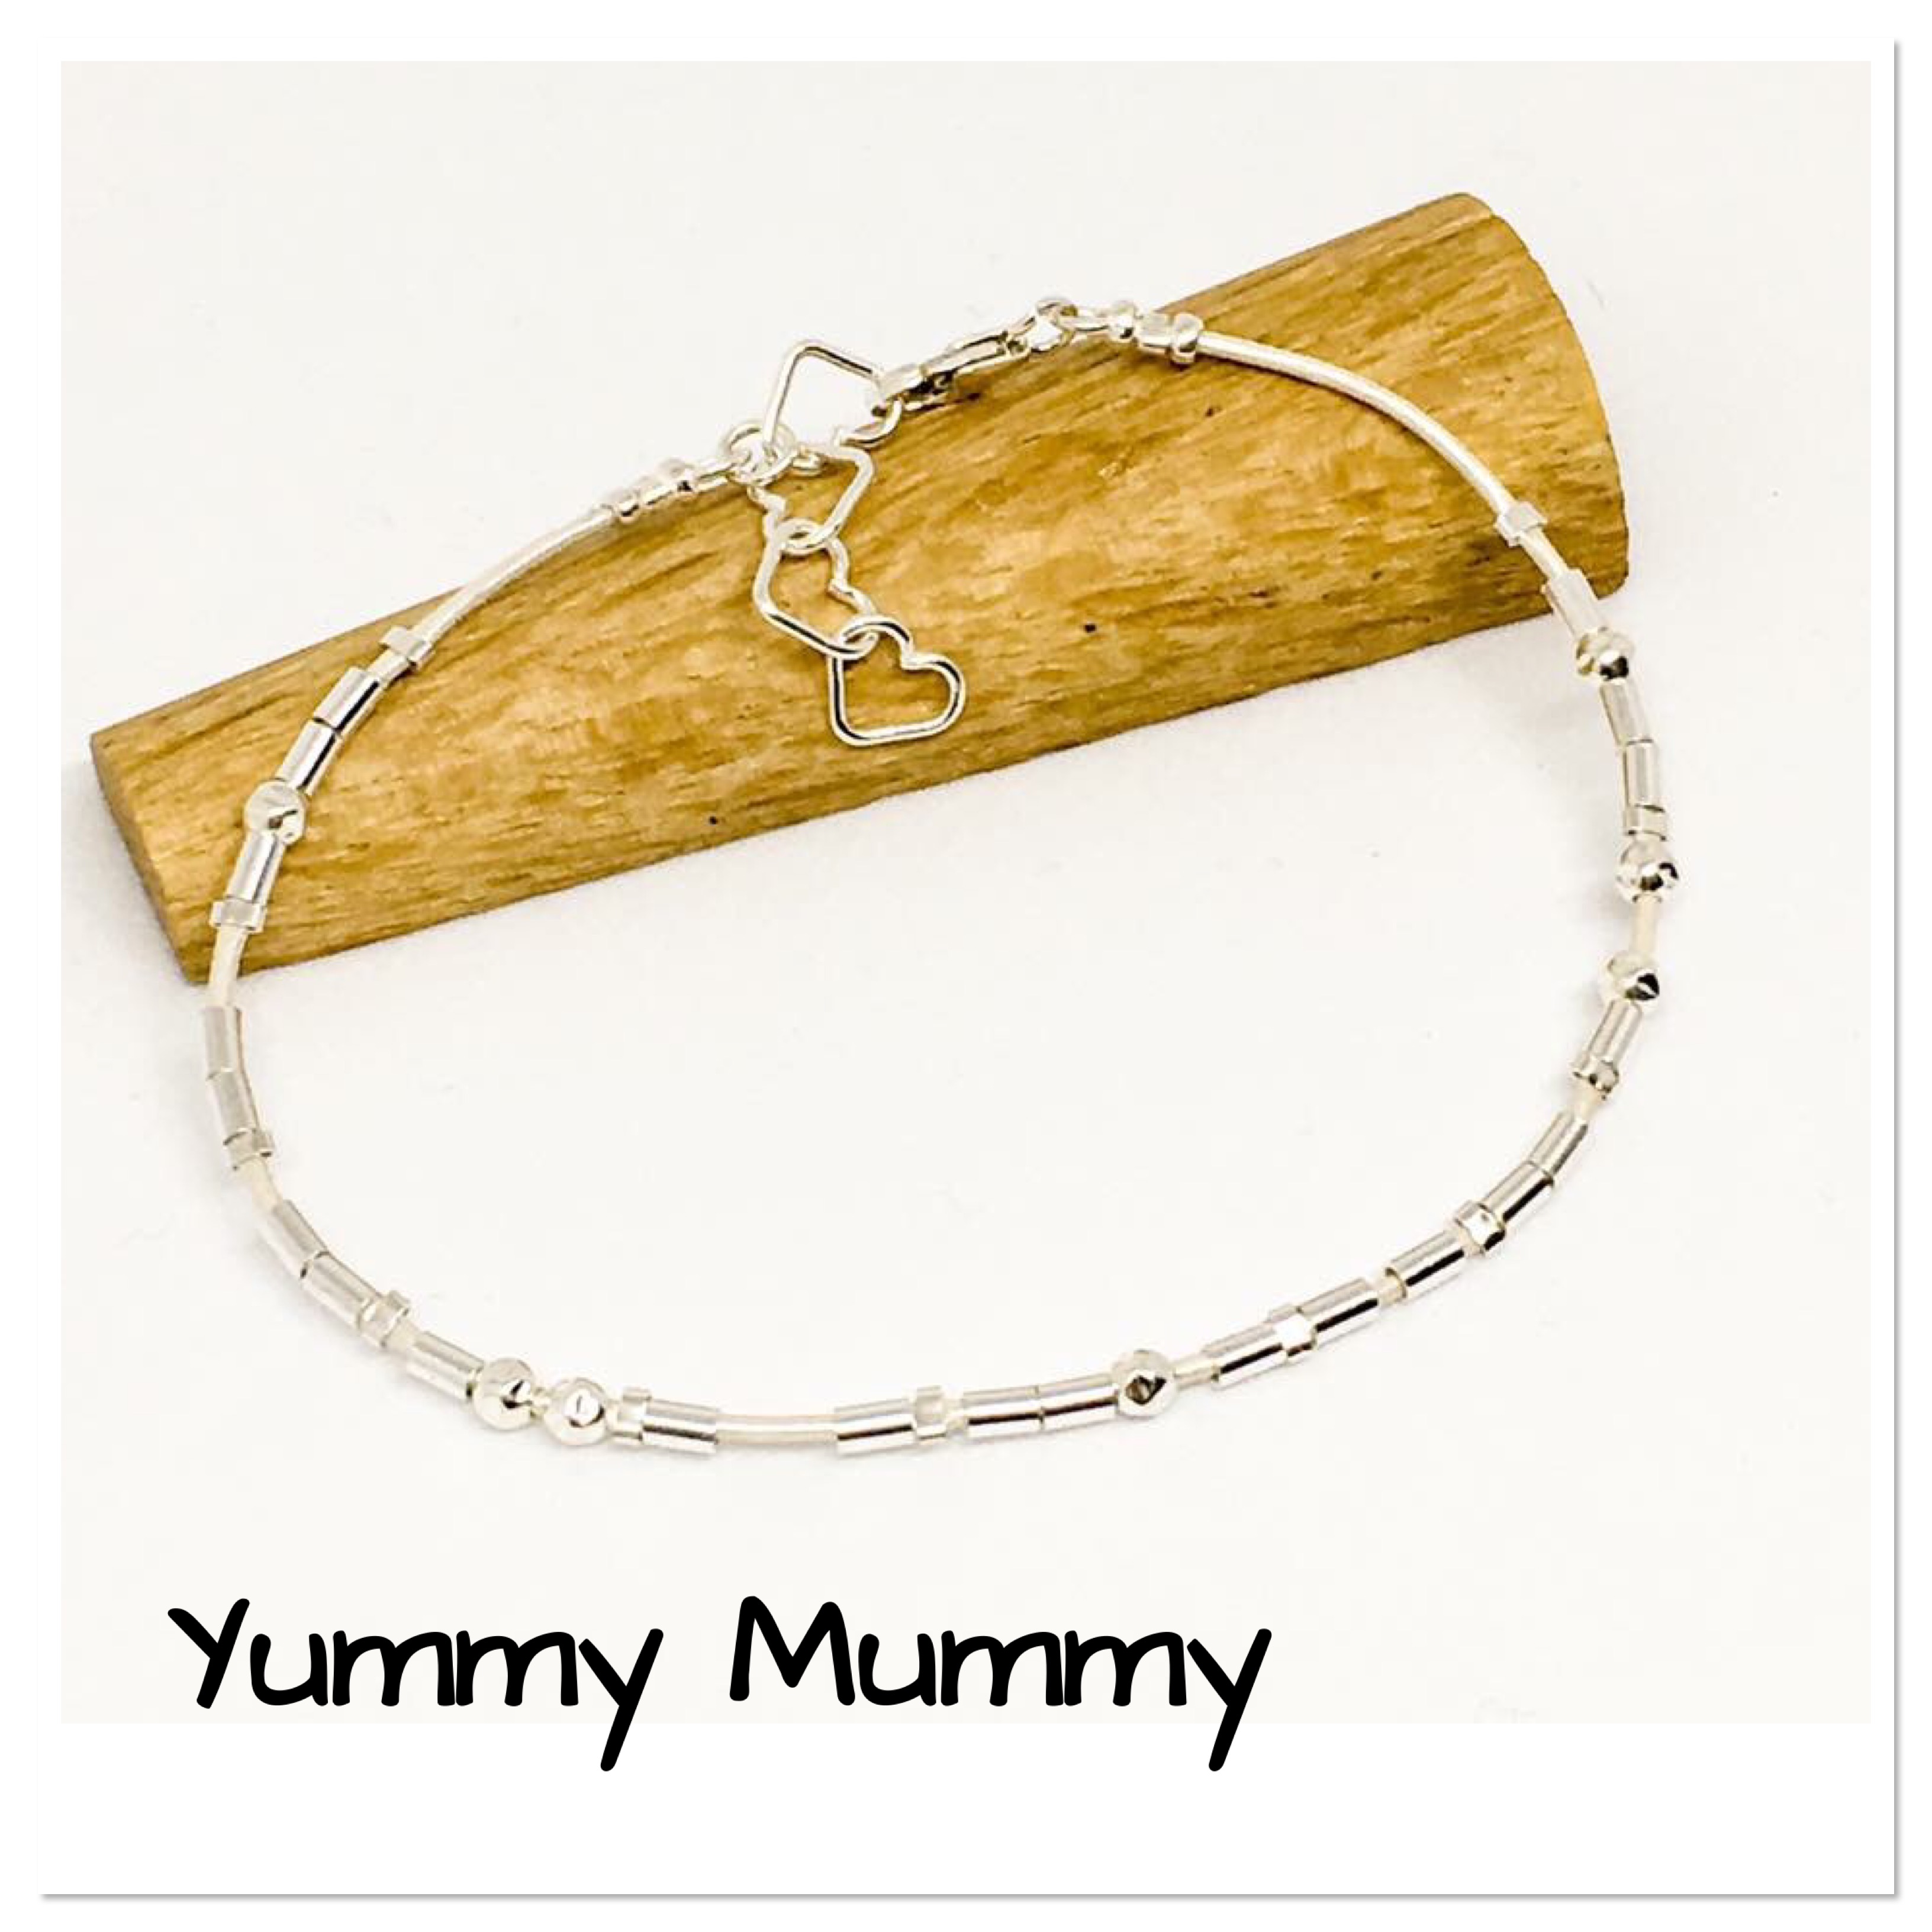 Morse code bracelet, Yummy Mummy, sterling silver and leather